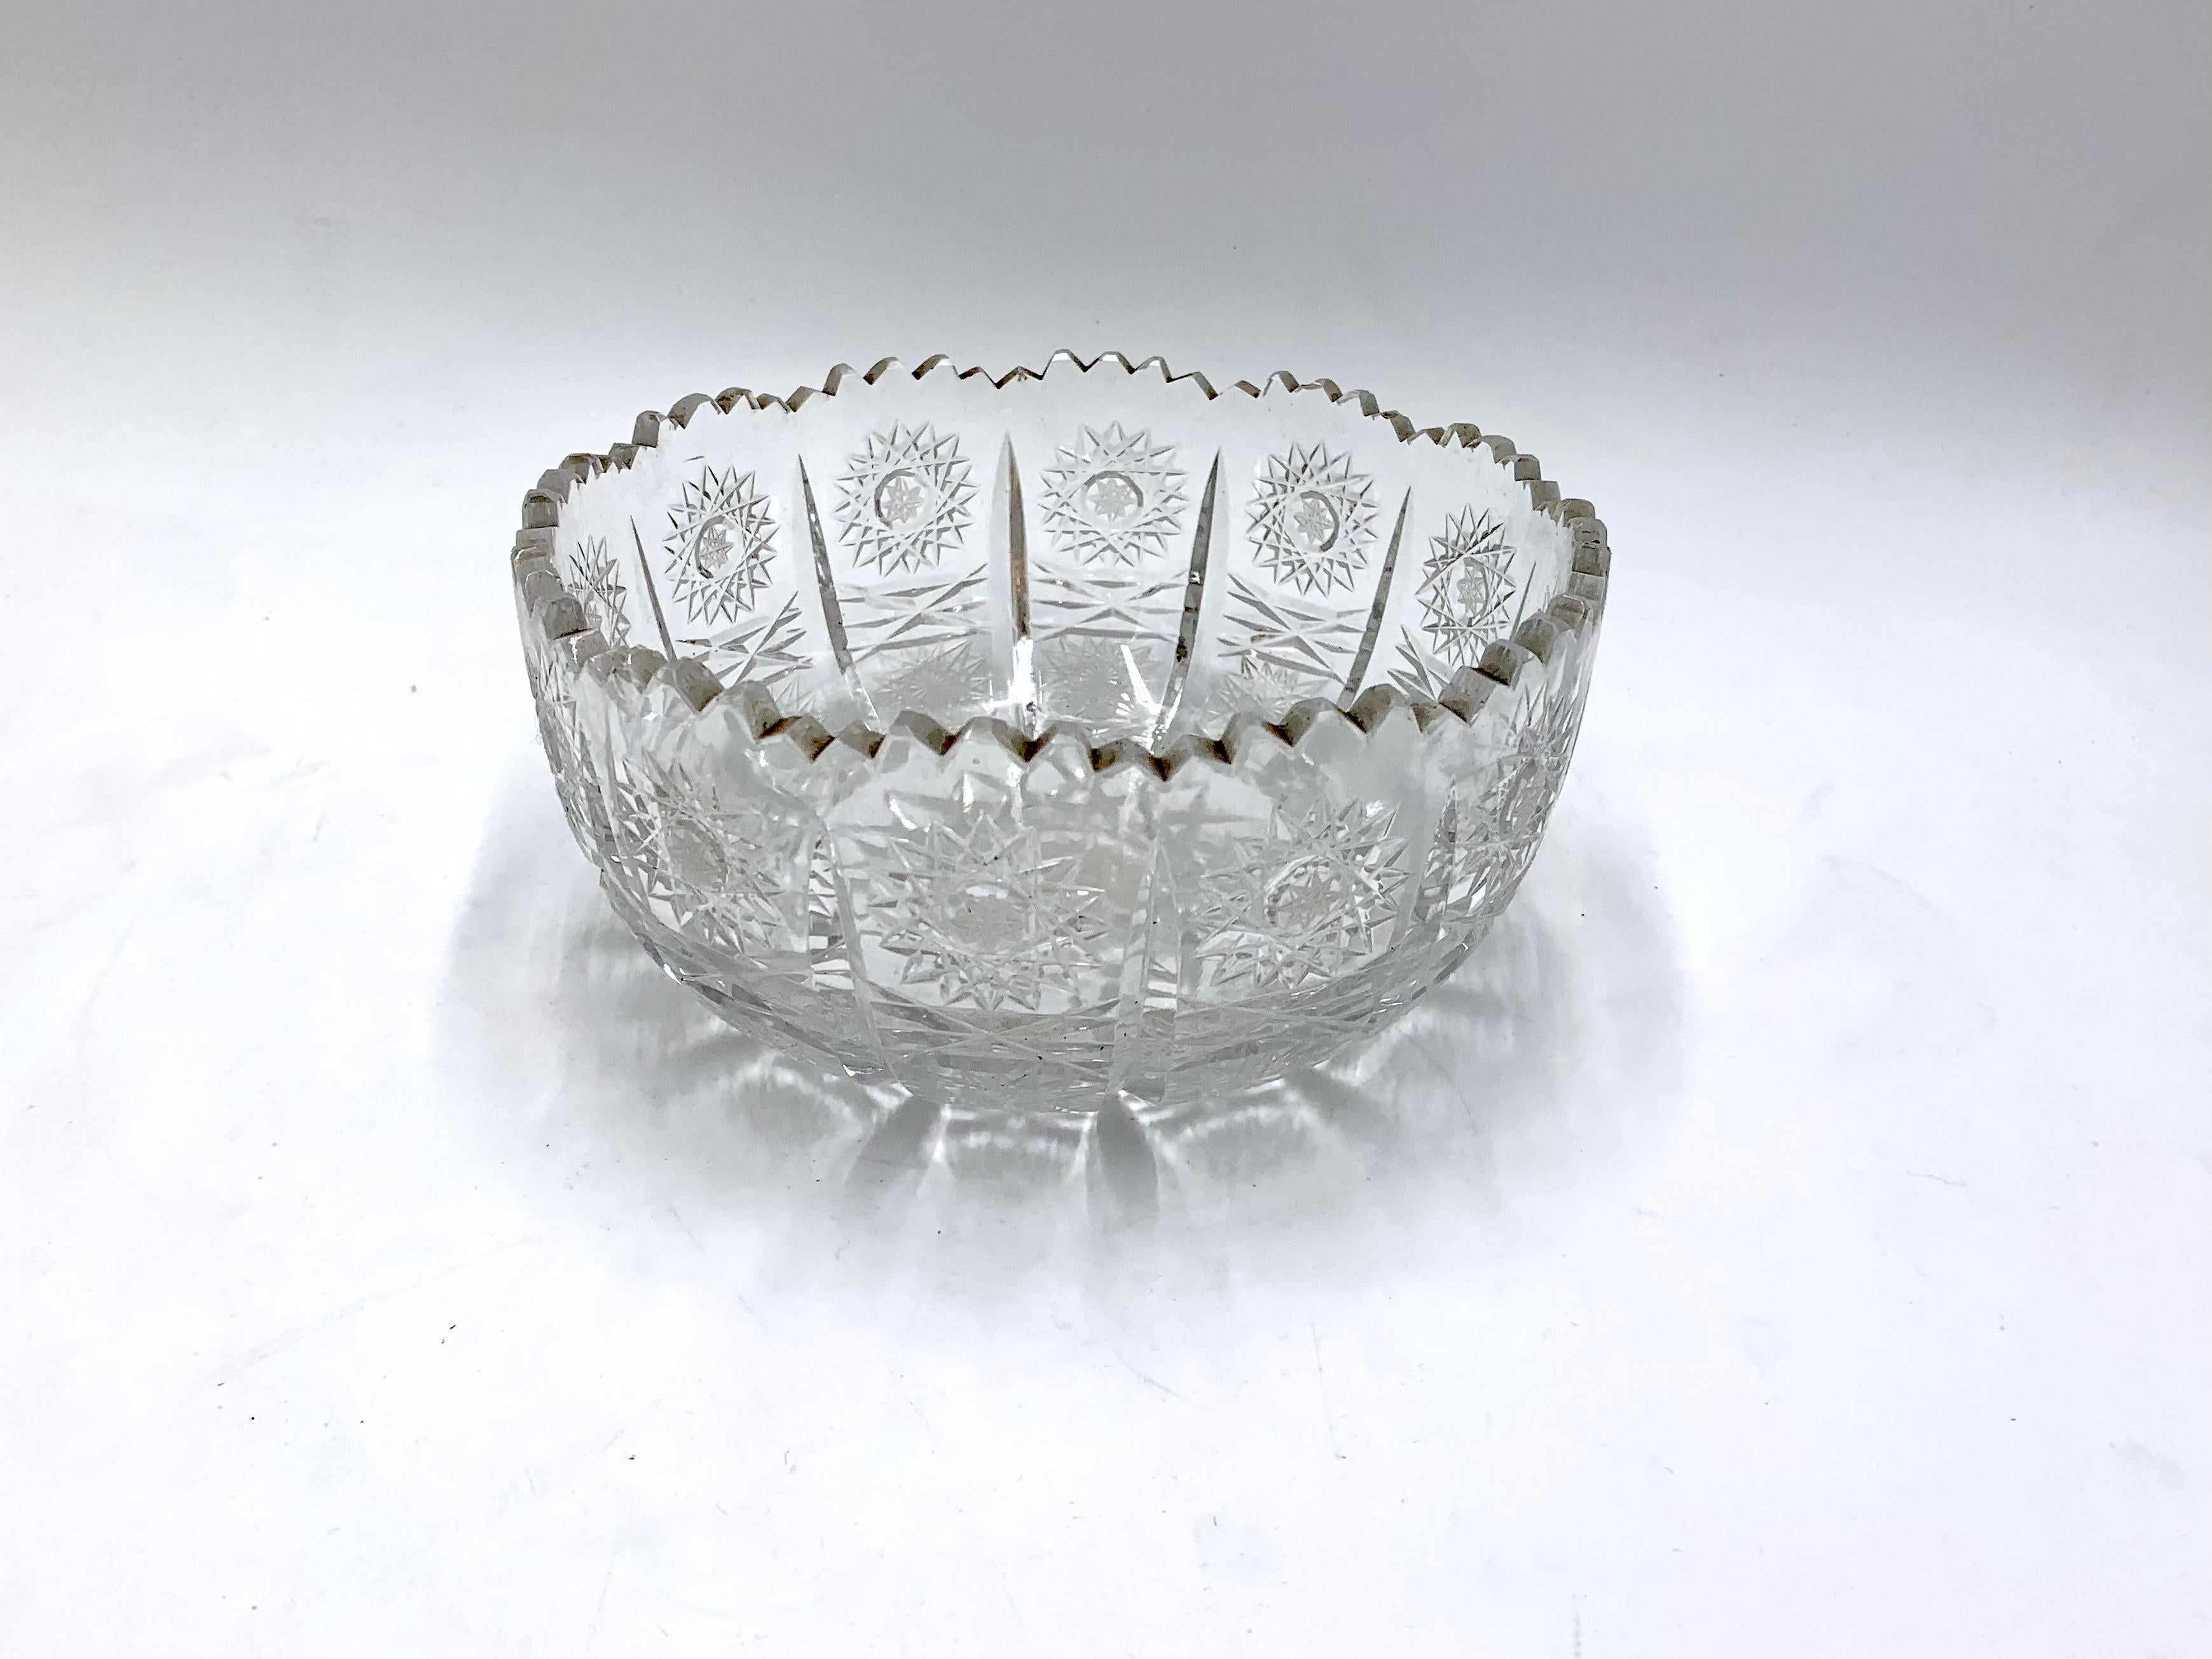 Crystal bowls for fruit or sweets.
Made in Poland in the 1950s / 1960s.
Very good condition.
Dimensions: height 9 cm / diameter 19cm.
Smaller height 6 cm / diameter 12cm.